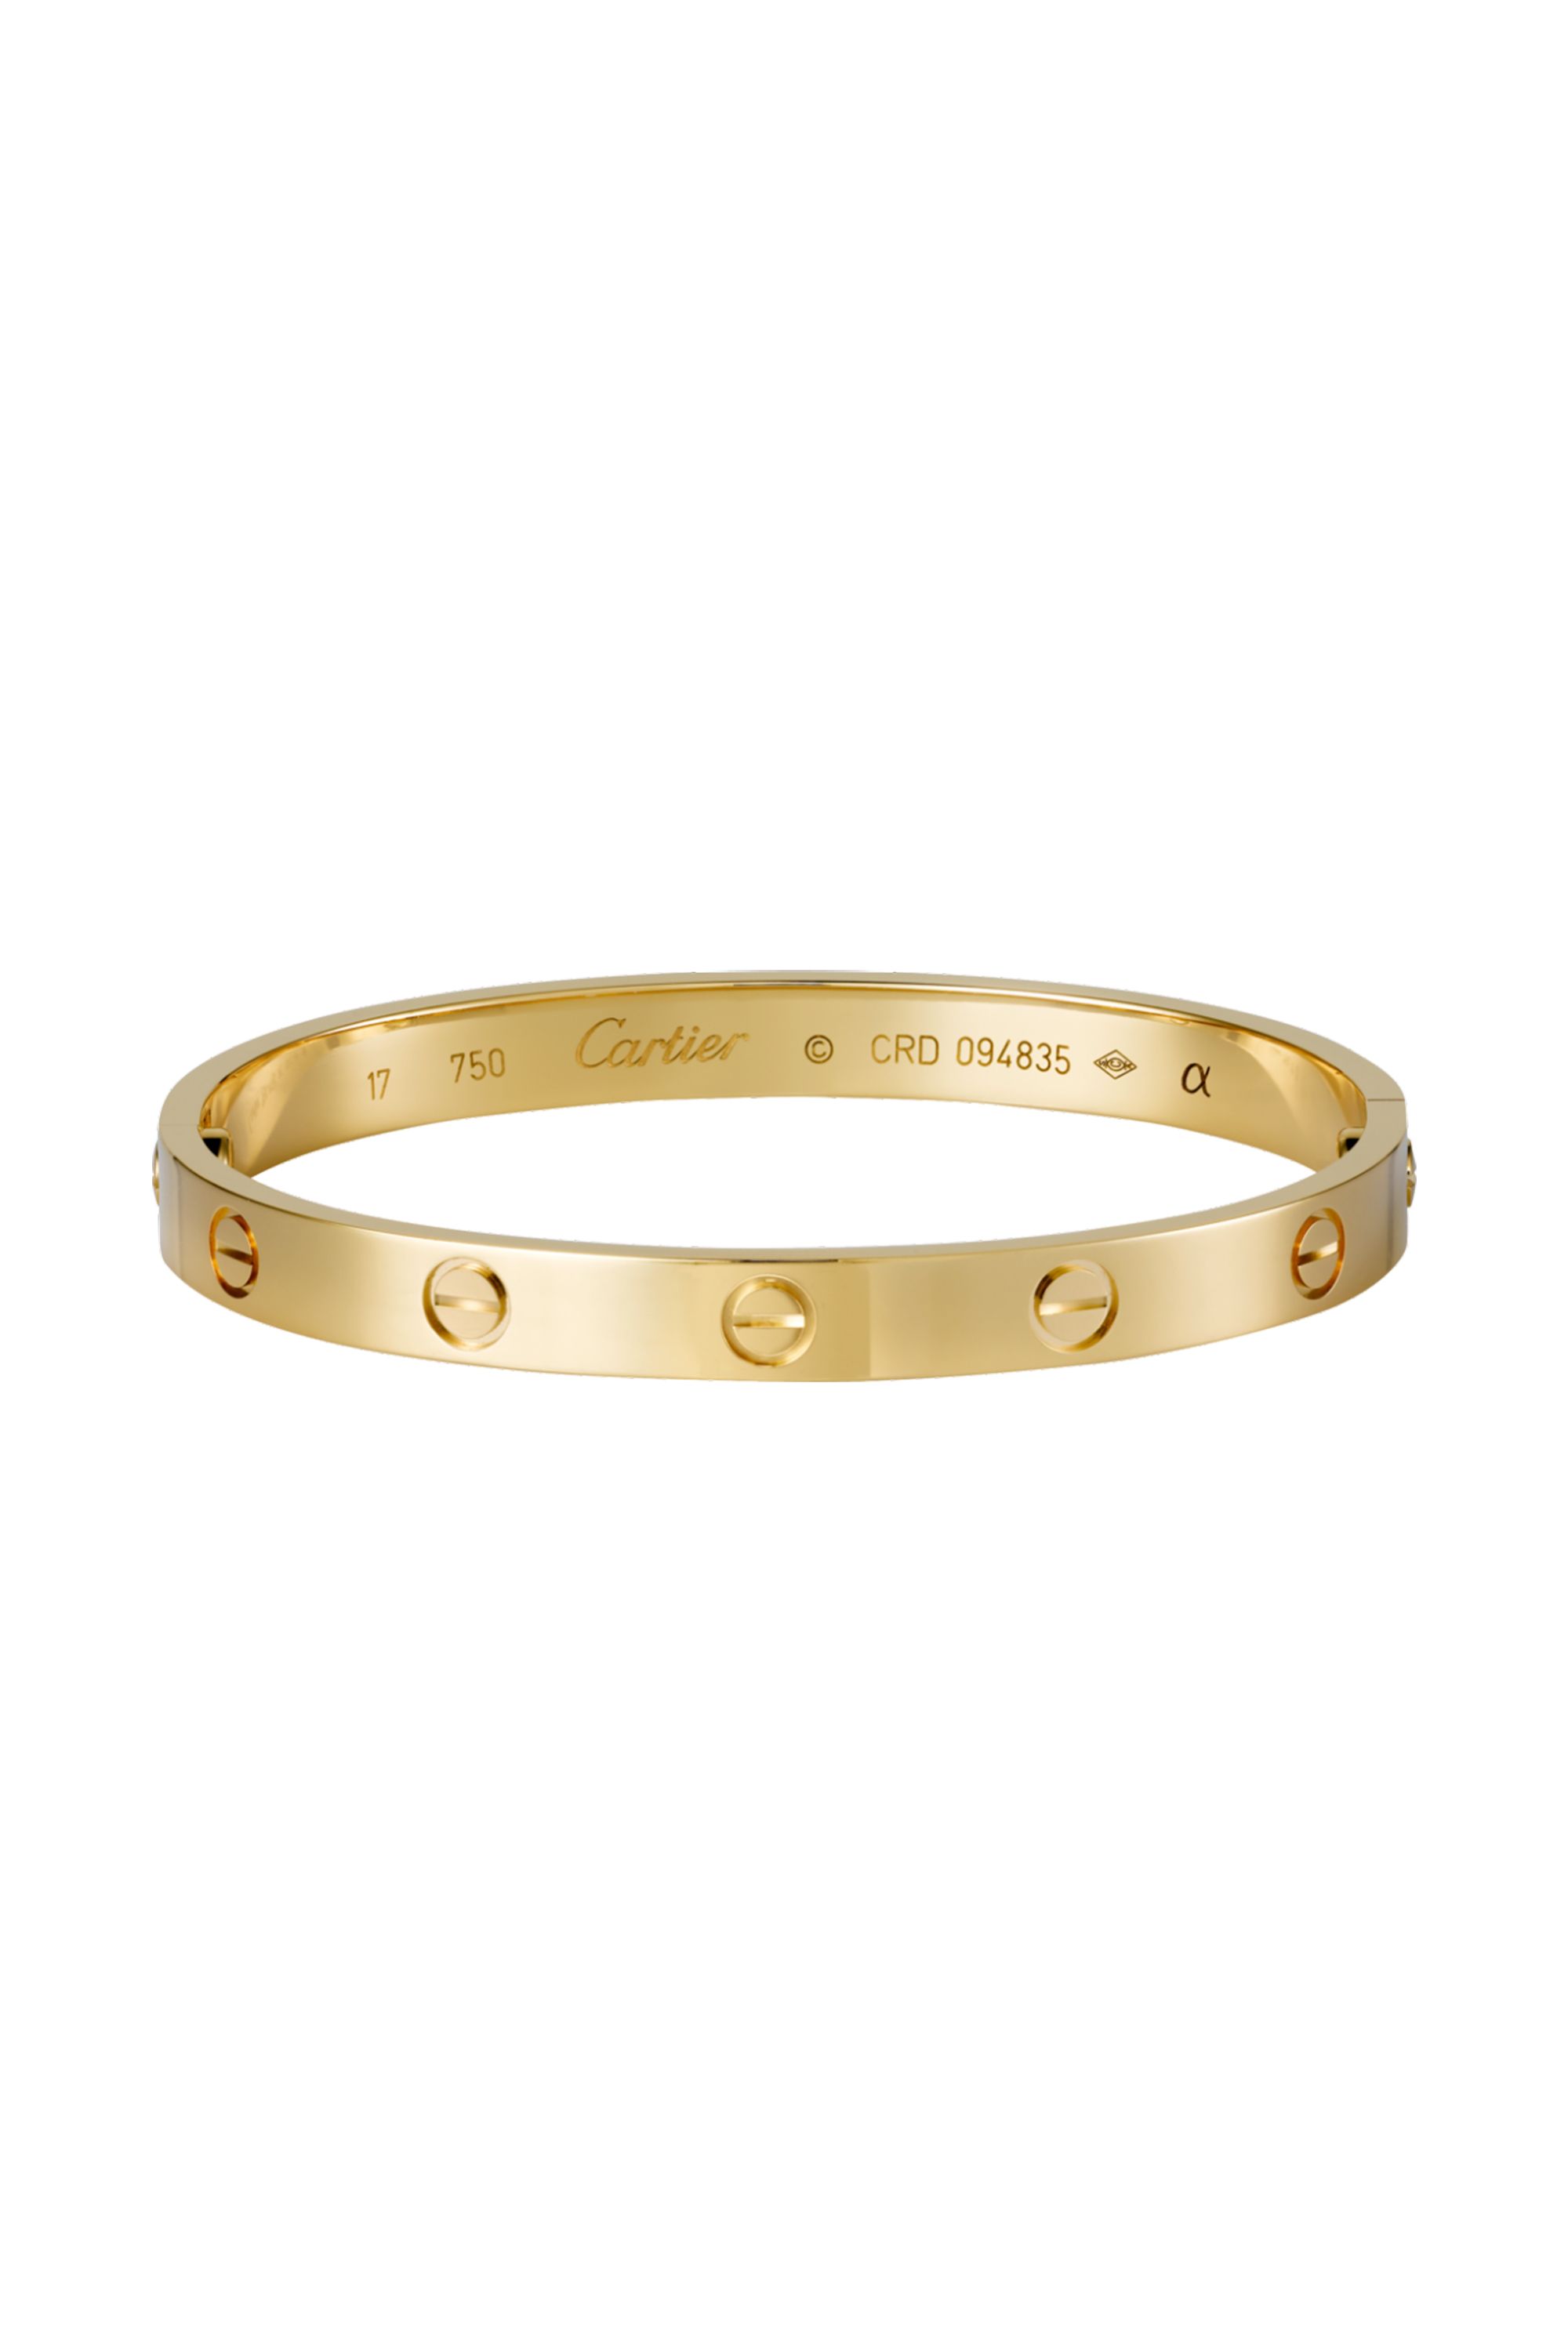 how much is the cheapest cartier bracelet